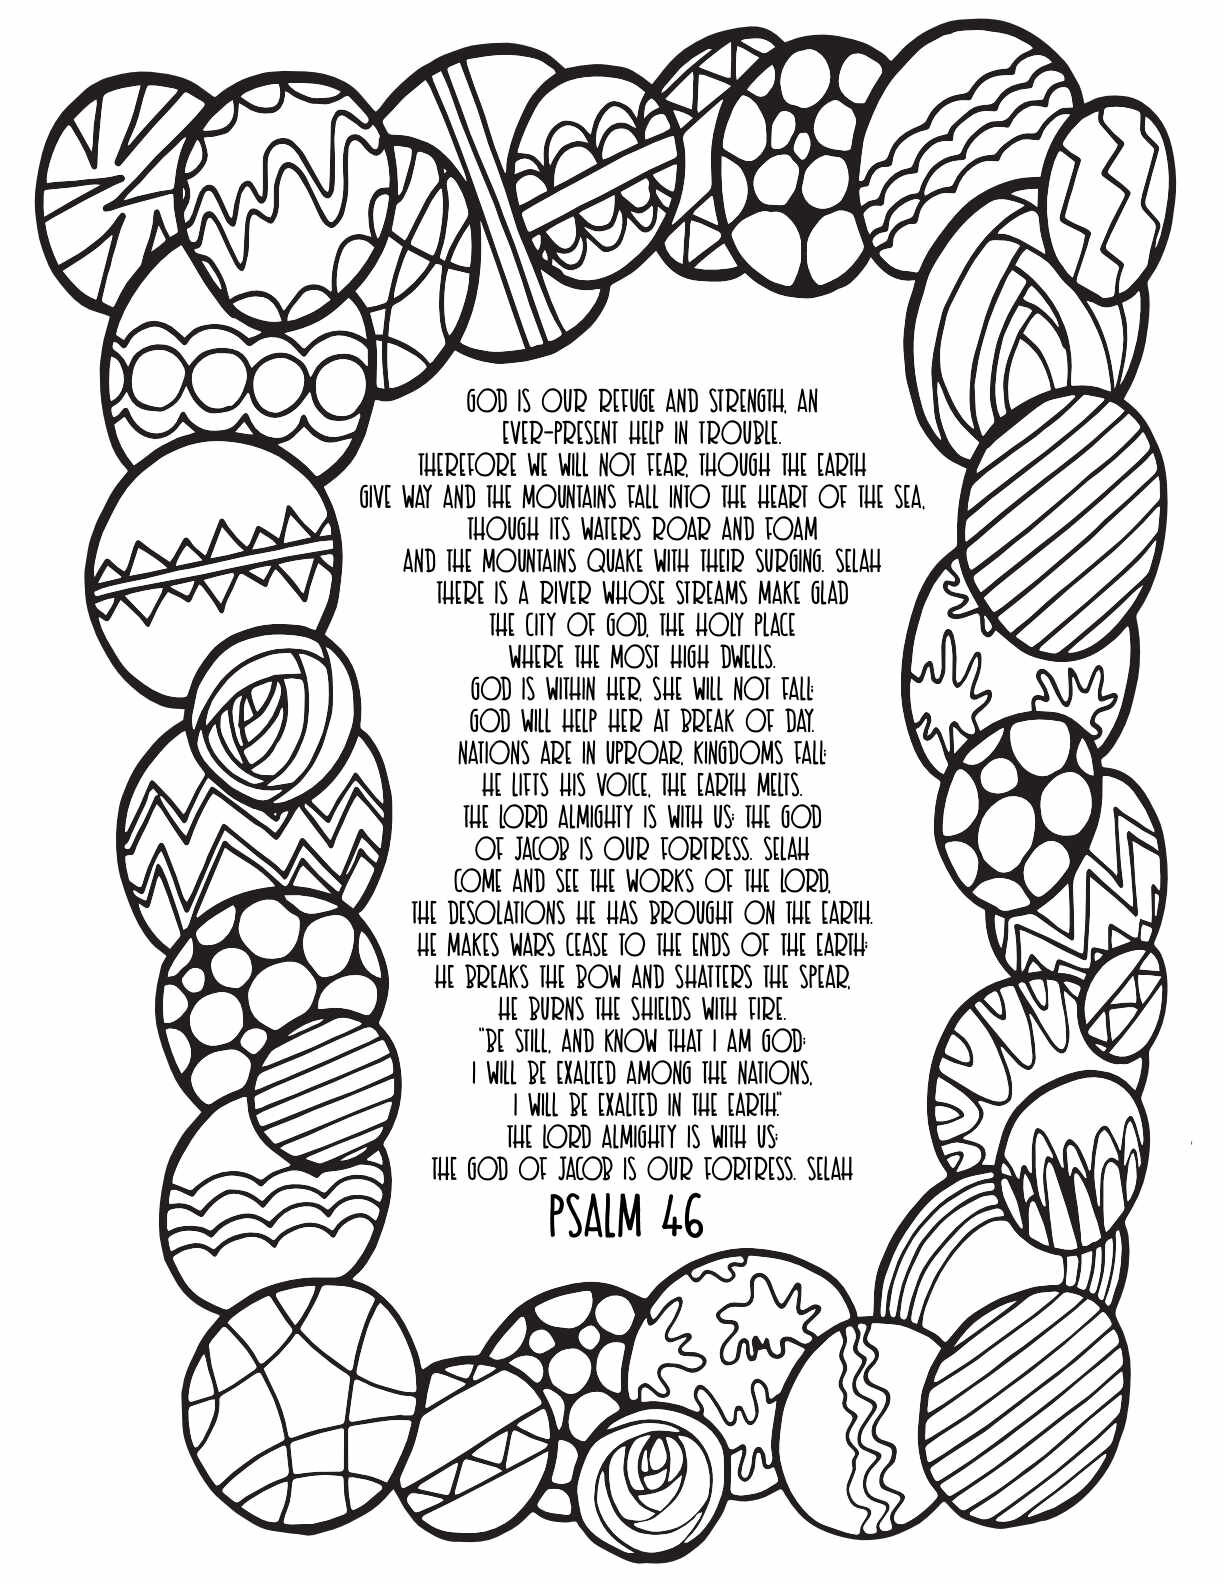 10 Free Printable Psalm Coloring Pages - Download and Color Adult Scripture - Psalm 46CLICK HERE TO DOWNLOAD THIS PAGE FREE